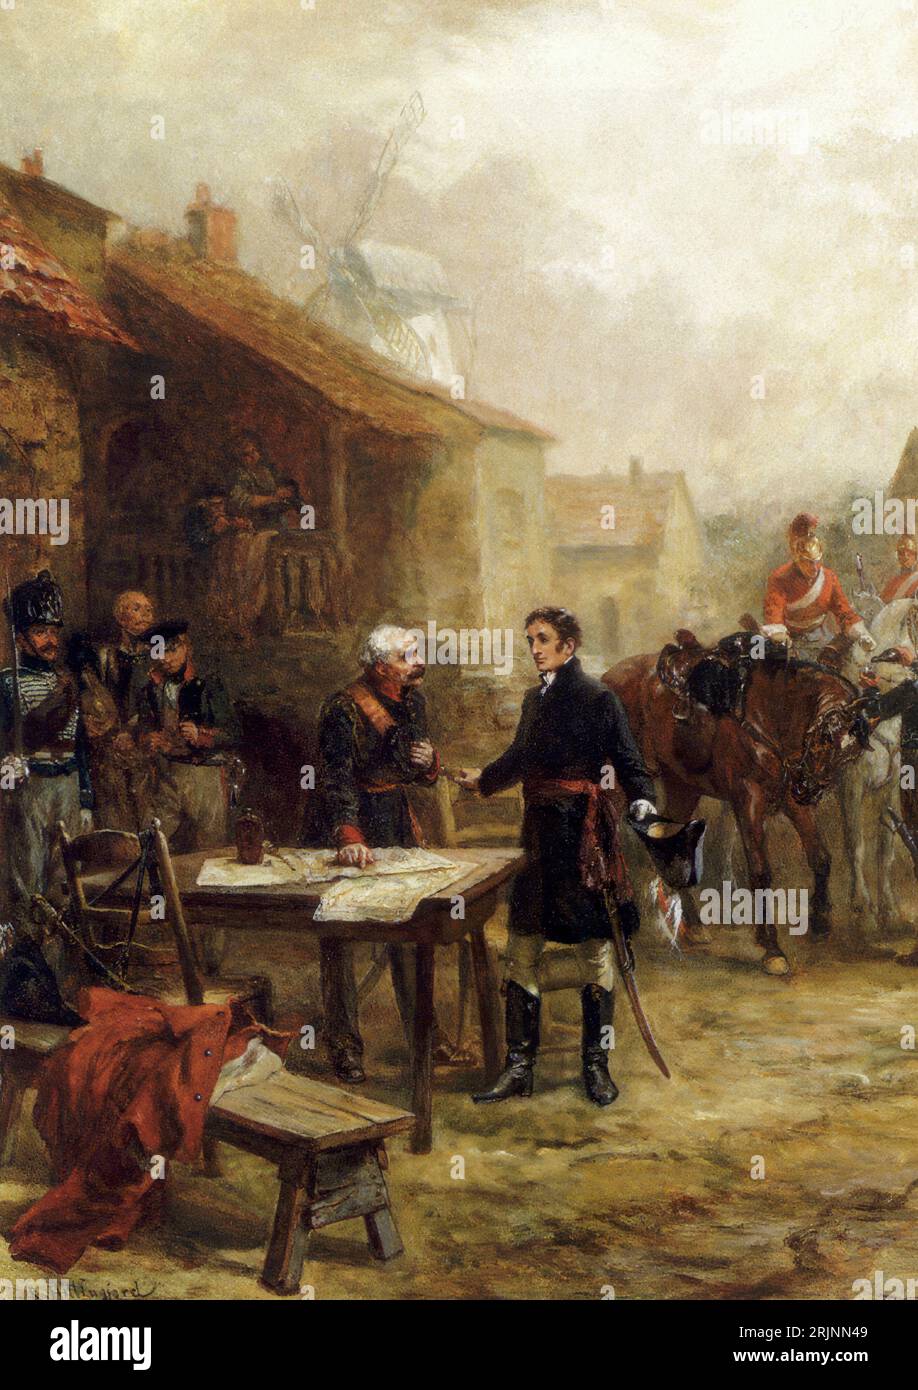 Wellington and Blucher Meeting before the Battle of Waterloo, painting by Robert Alexander Hillingford, after 1815 Stock Photo